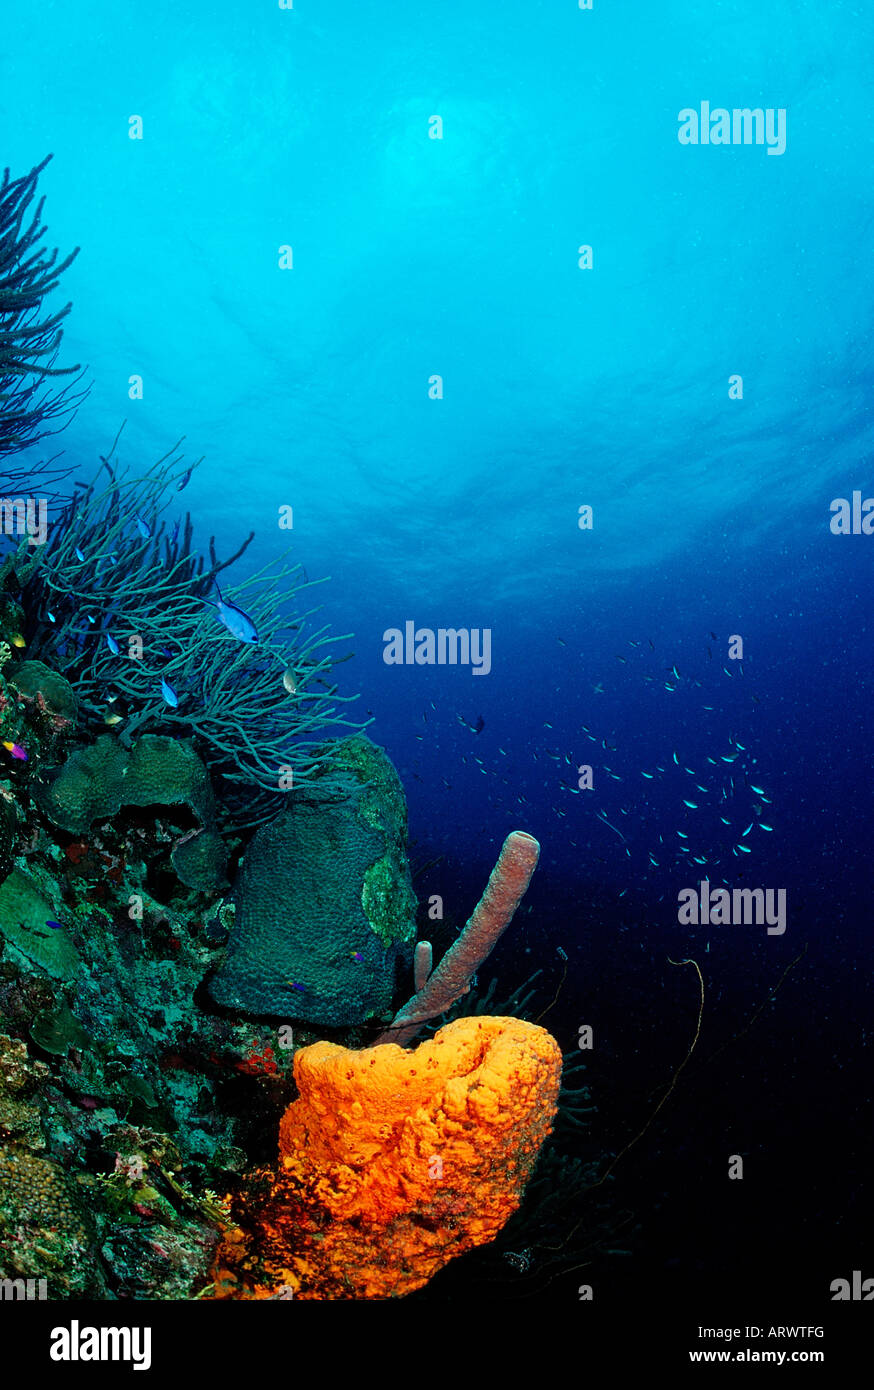 Coral Reef with Sponge Caribbean Sea Belize Stock Photo